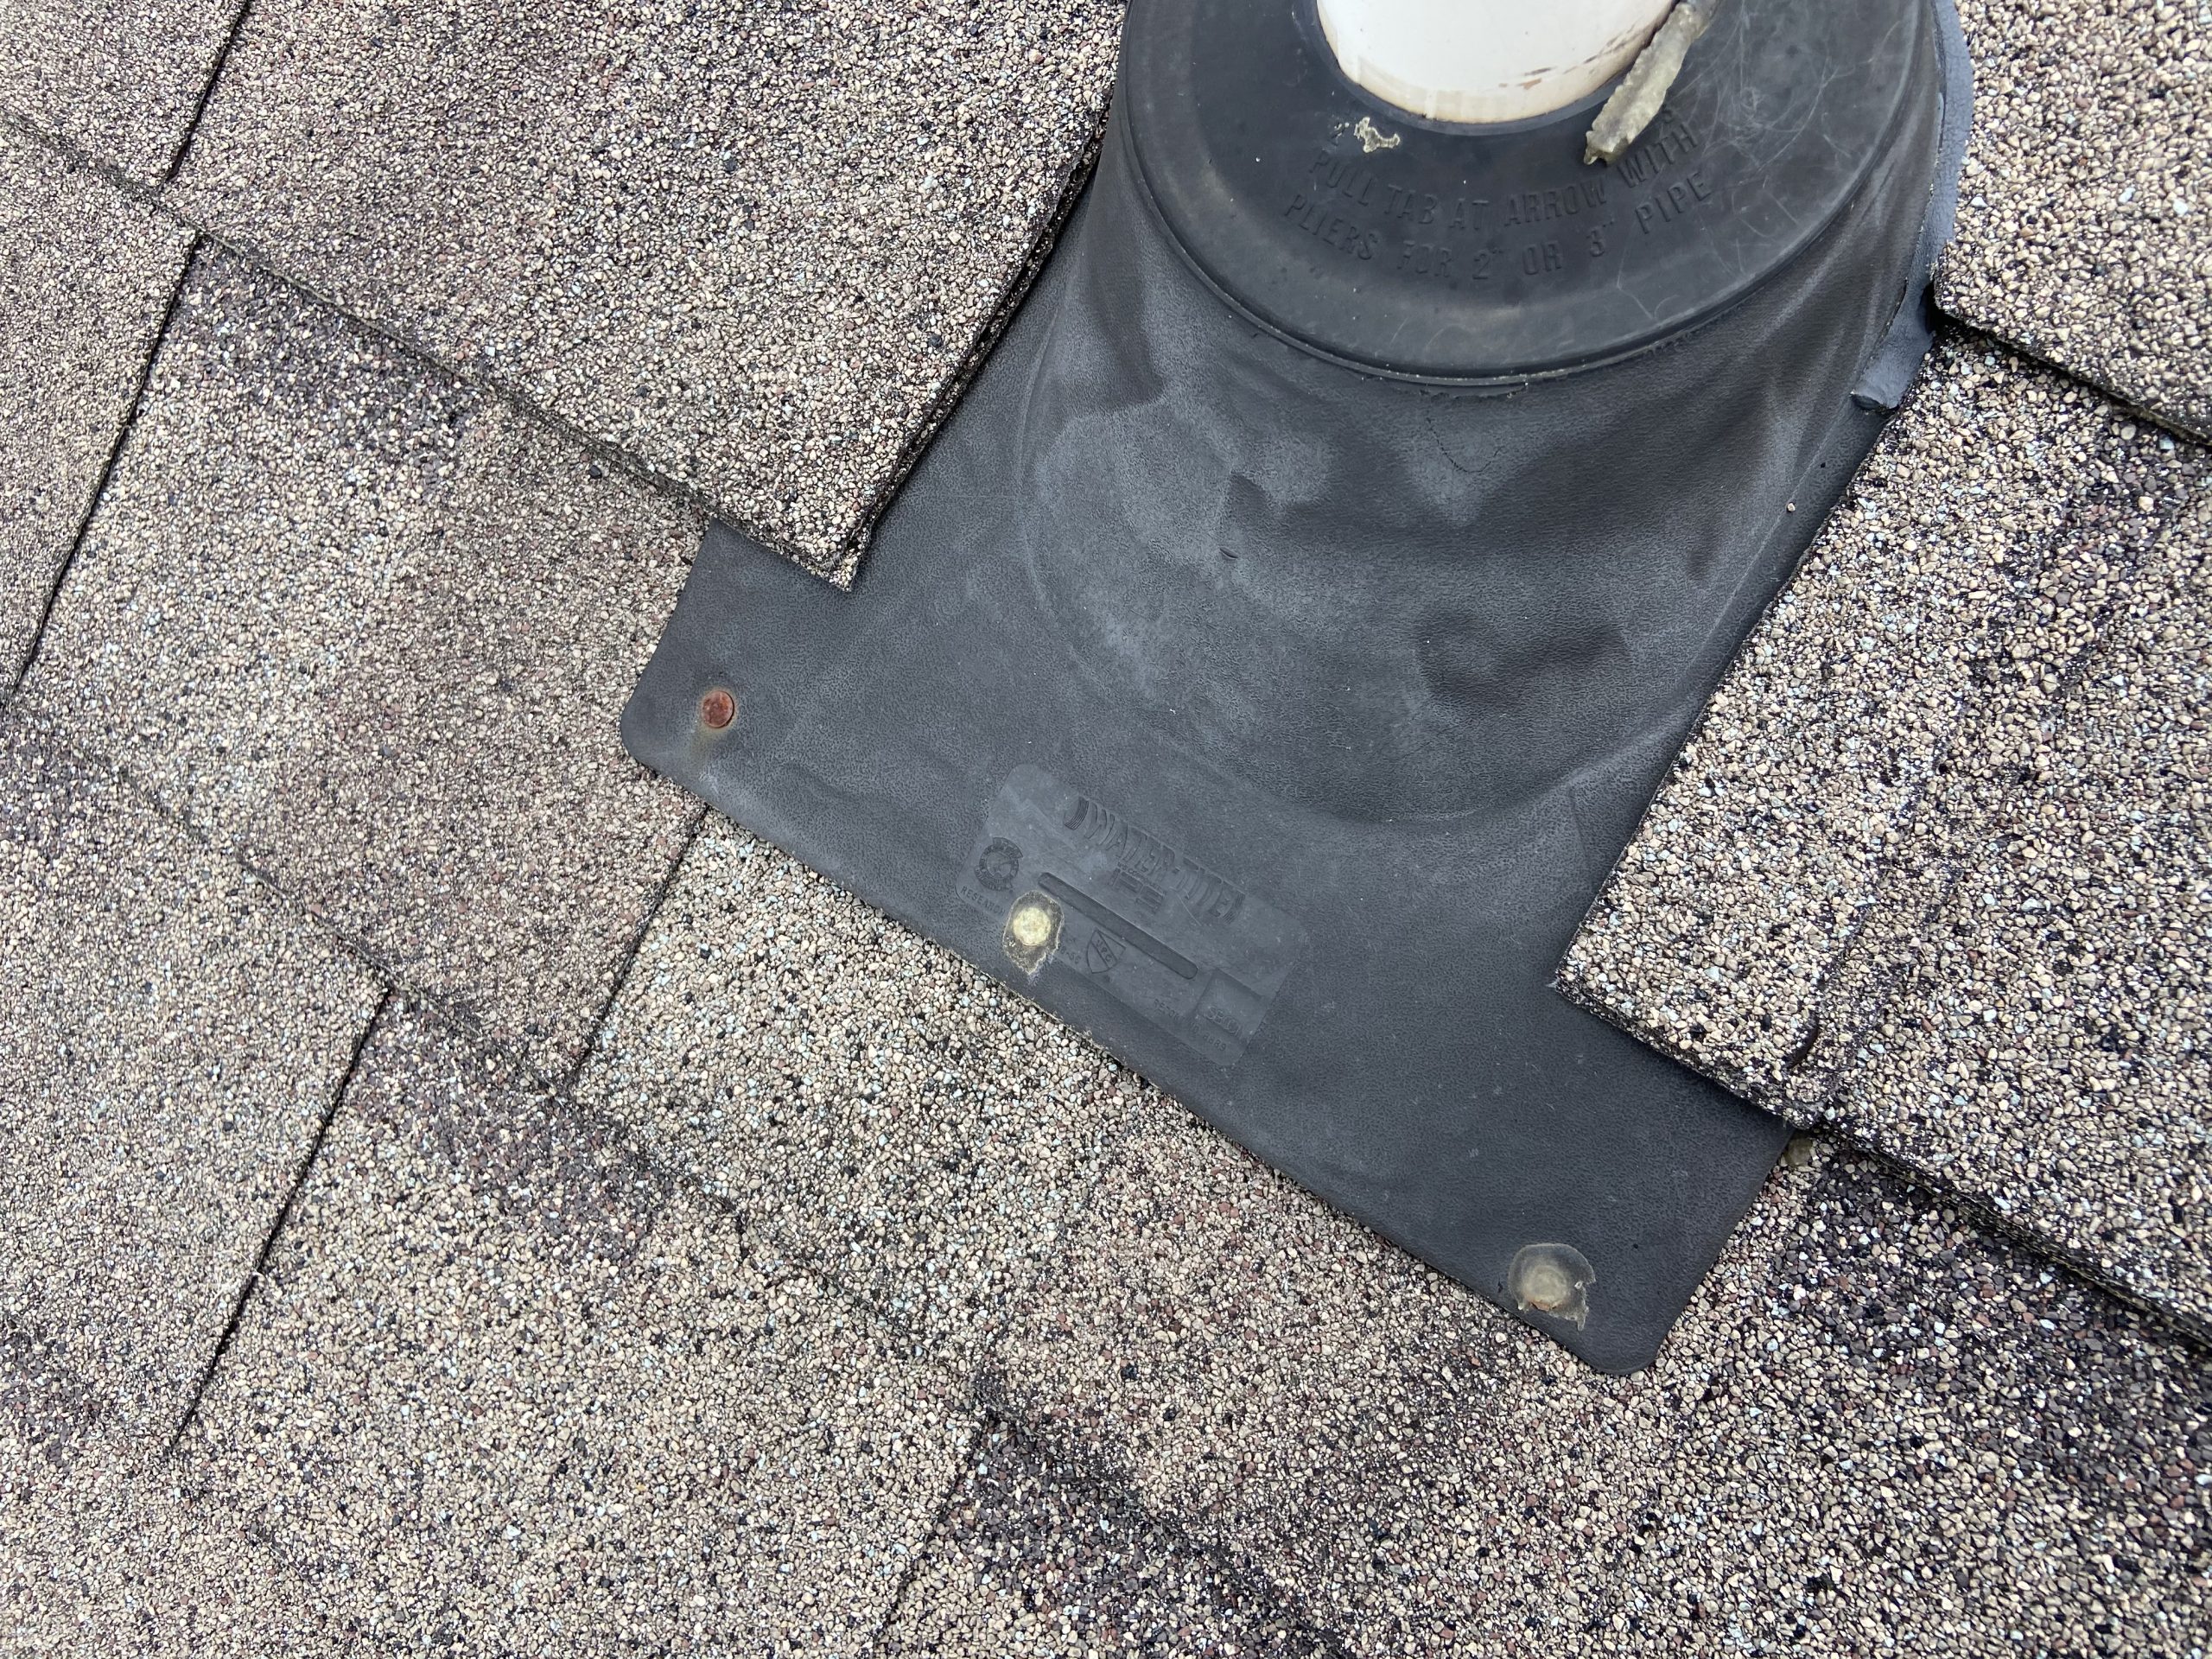 this is a picture of rusty nails on a roof that are holding down a pipe boot